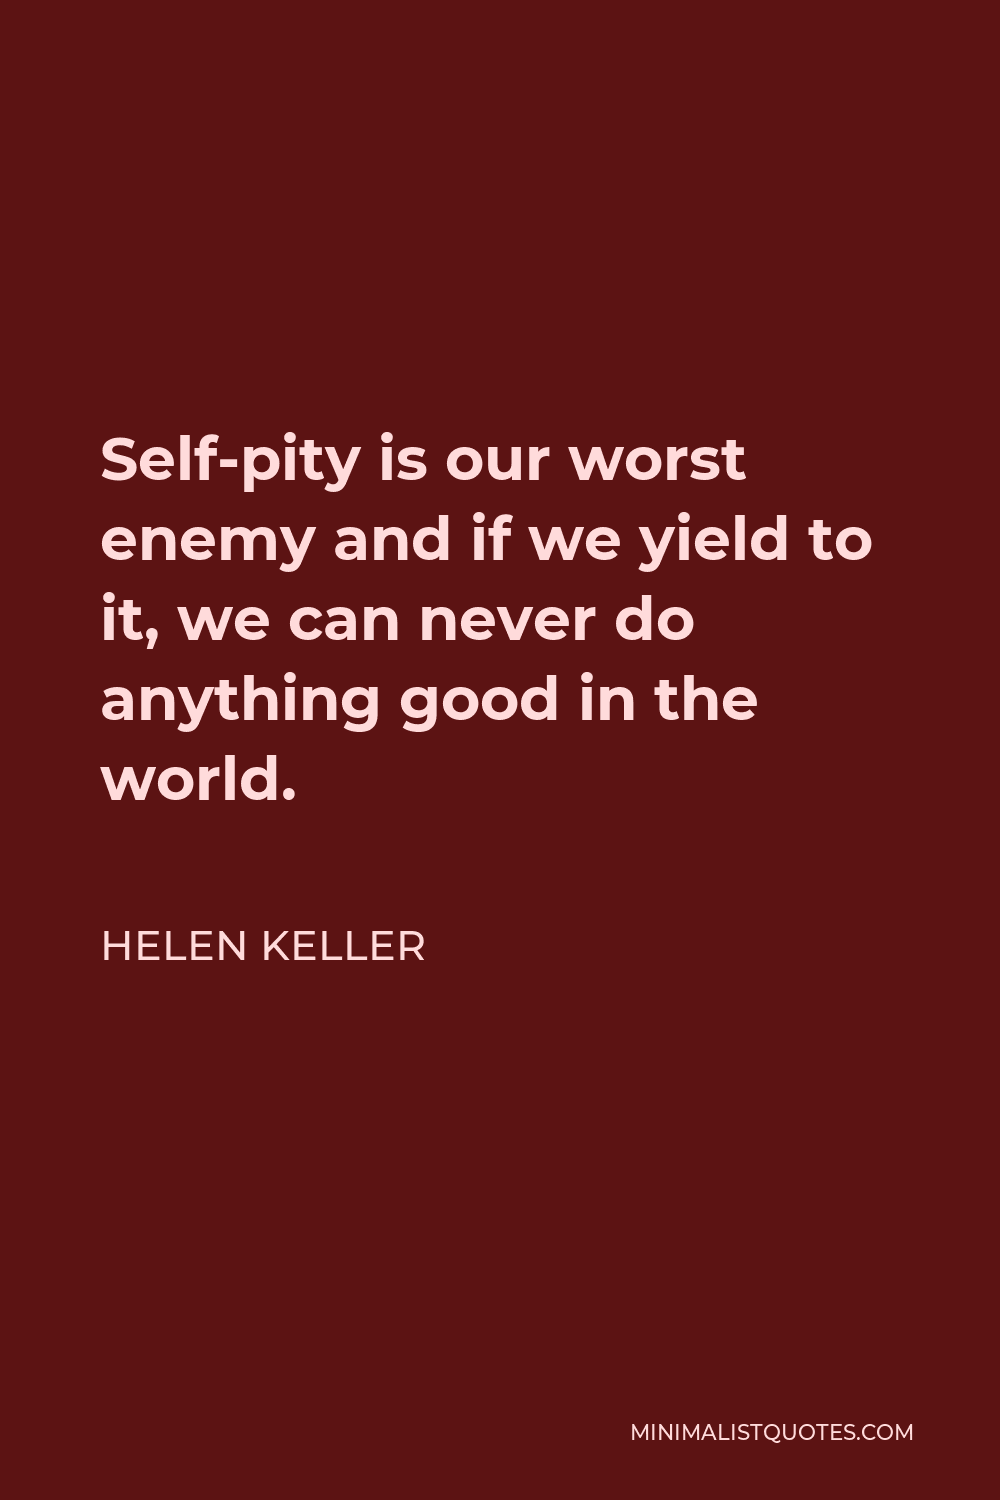 Helen Keller Quote - Self-pity is our worst enemy and if we yield to it, we can never do anything good in the world.